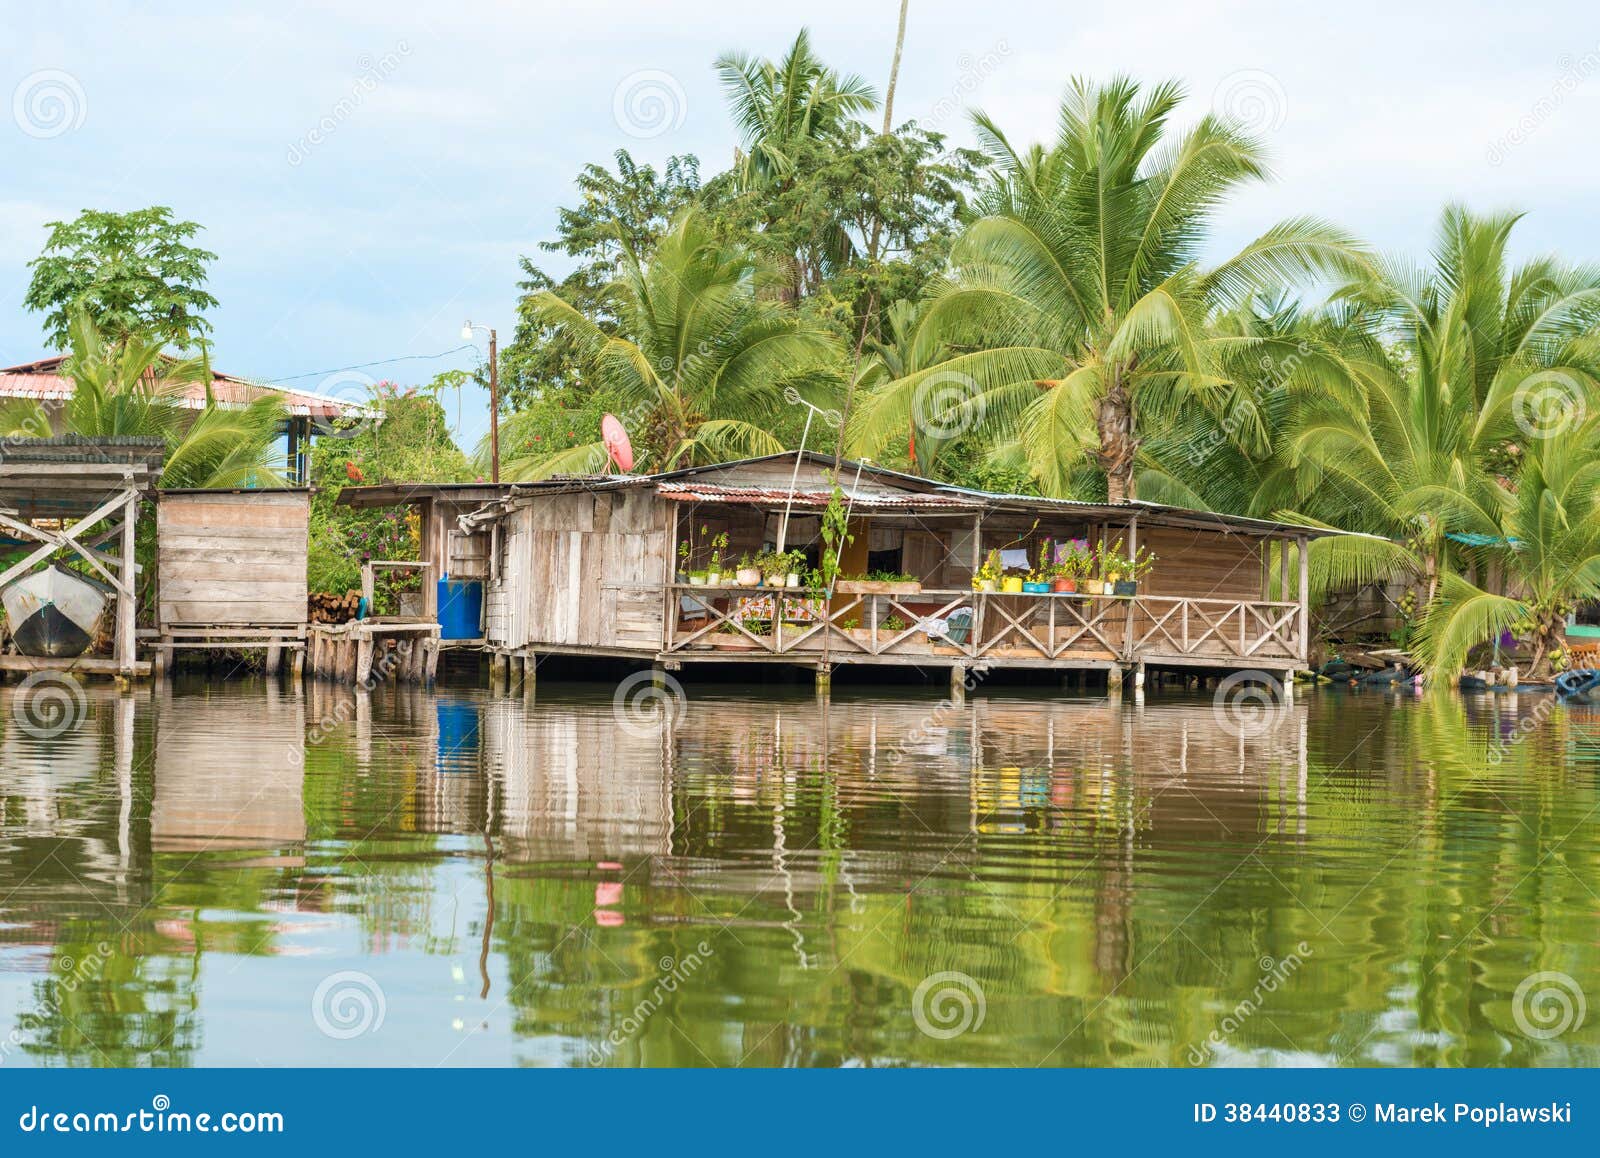 houses on the water in almirante, panama